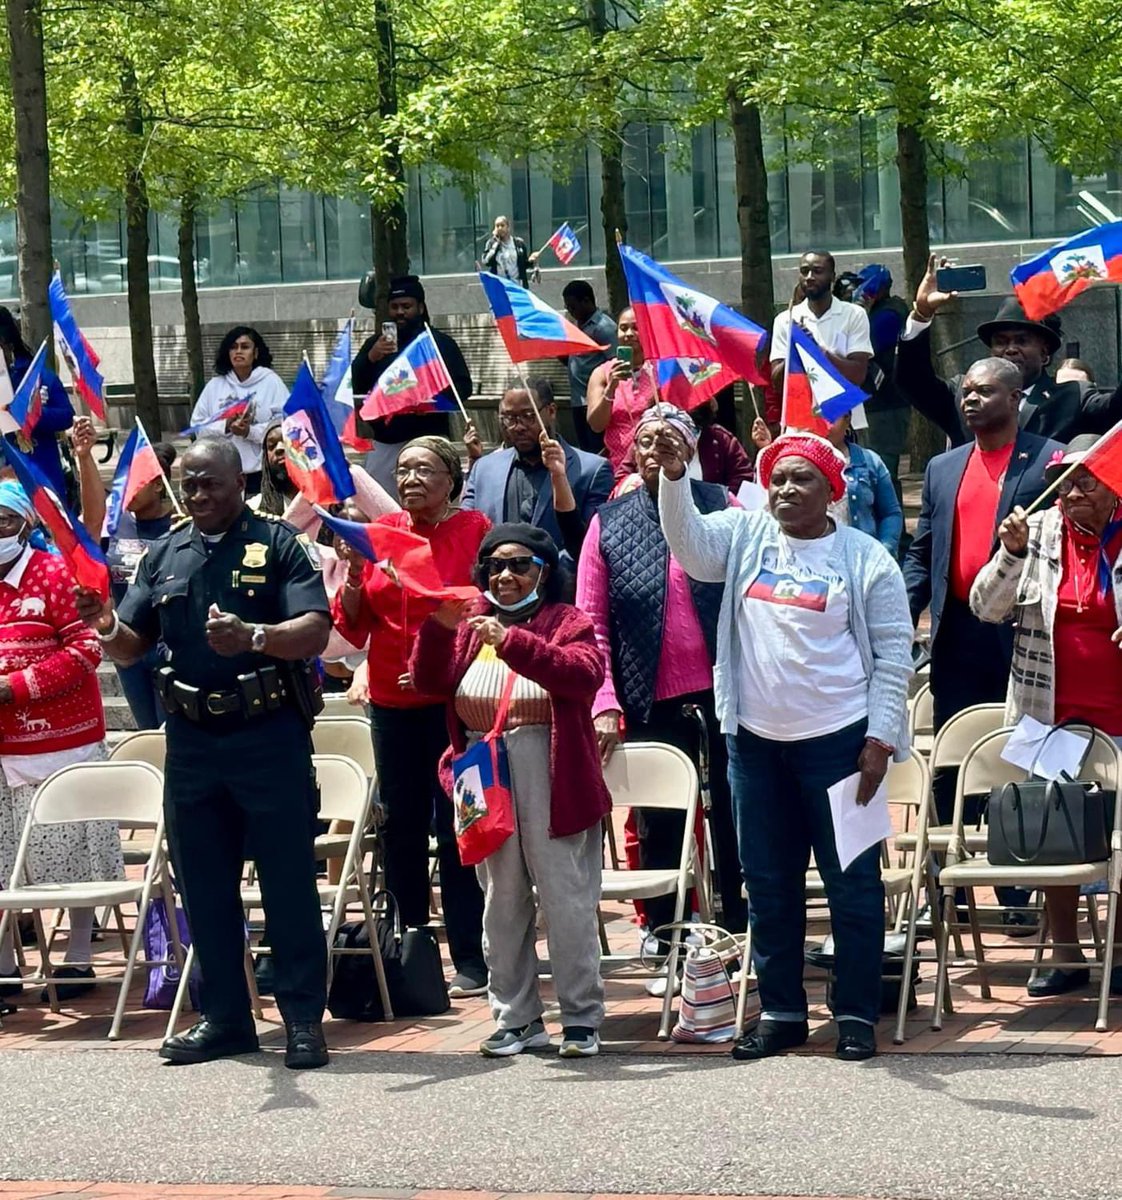 Proud to attend yesterday’s Haitian Flag Raising Ceremony at Boston City Hall. Haitian Heritage Month is celebrated annually to recognize the history, culture and contributions of Haitians to our city and country. #bospoli